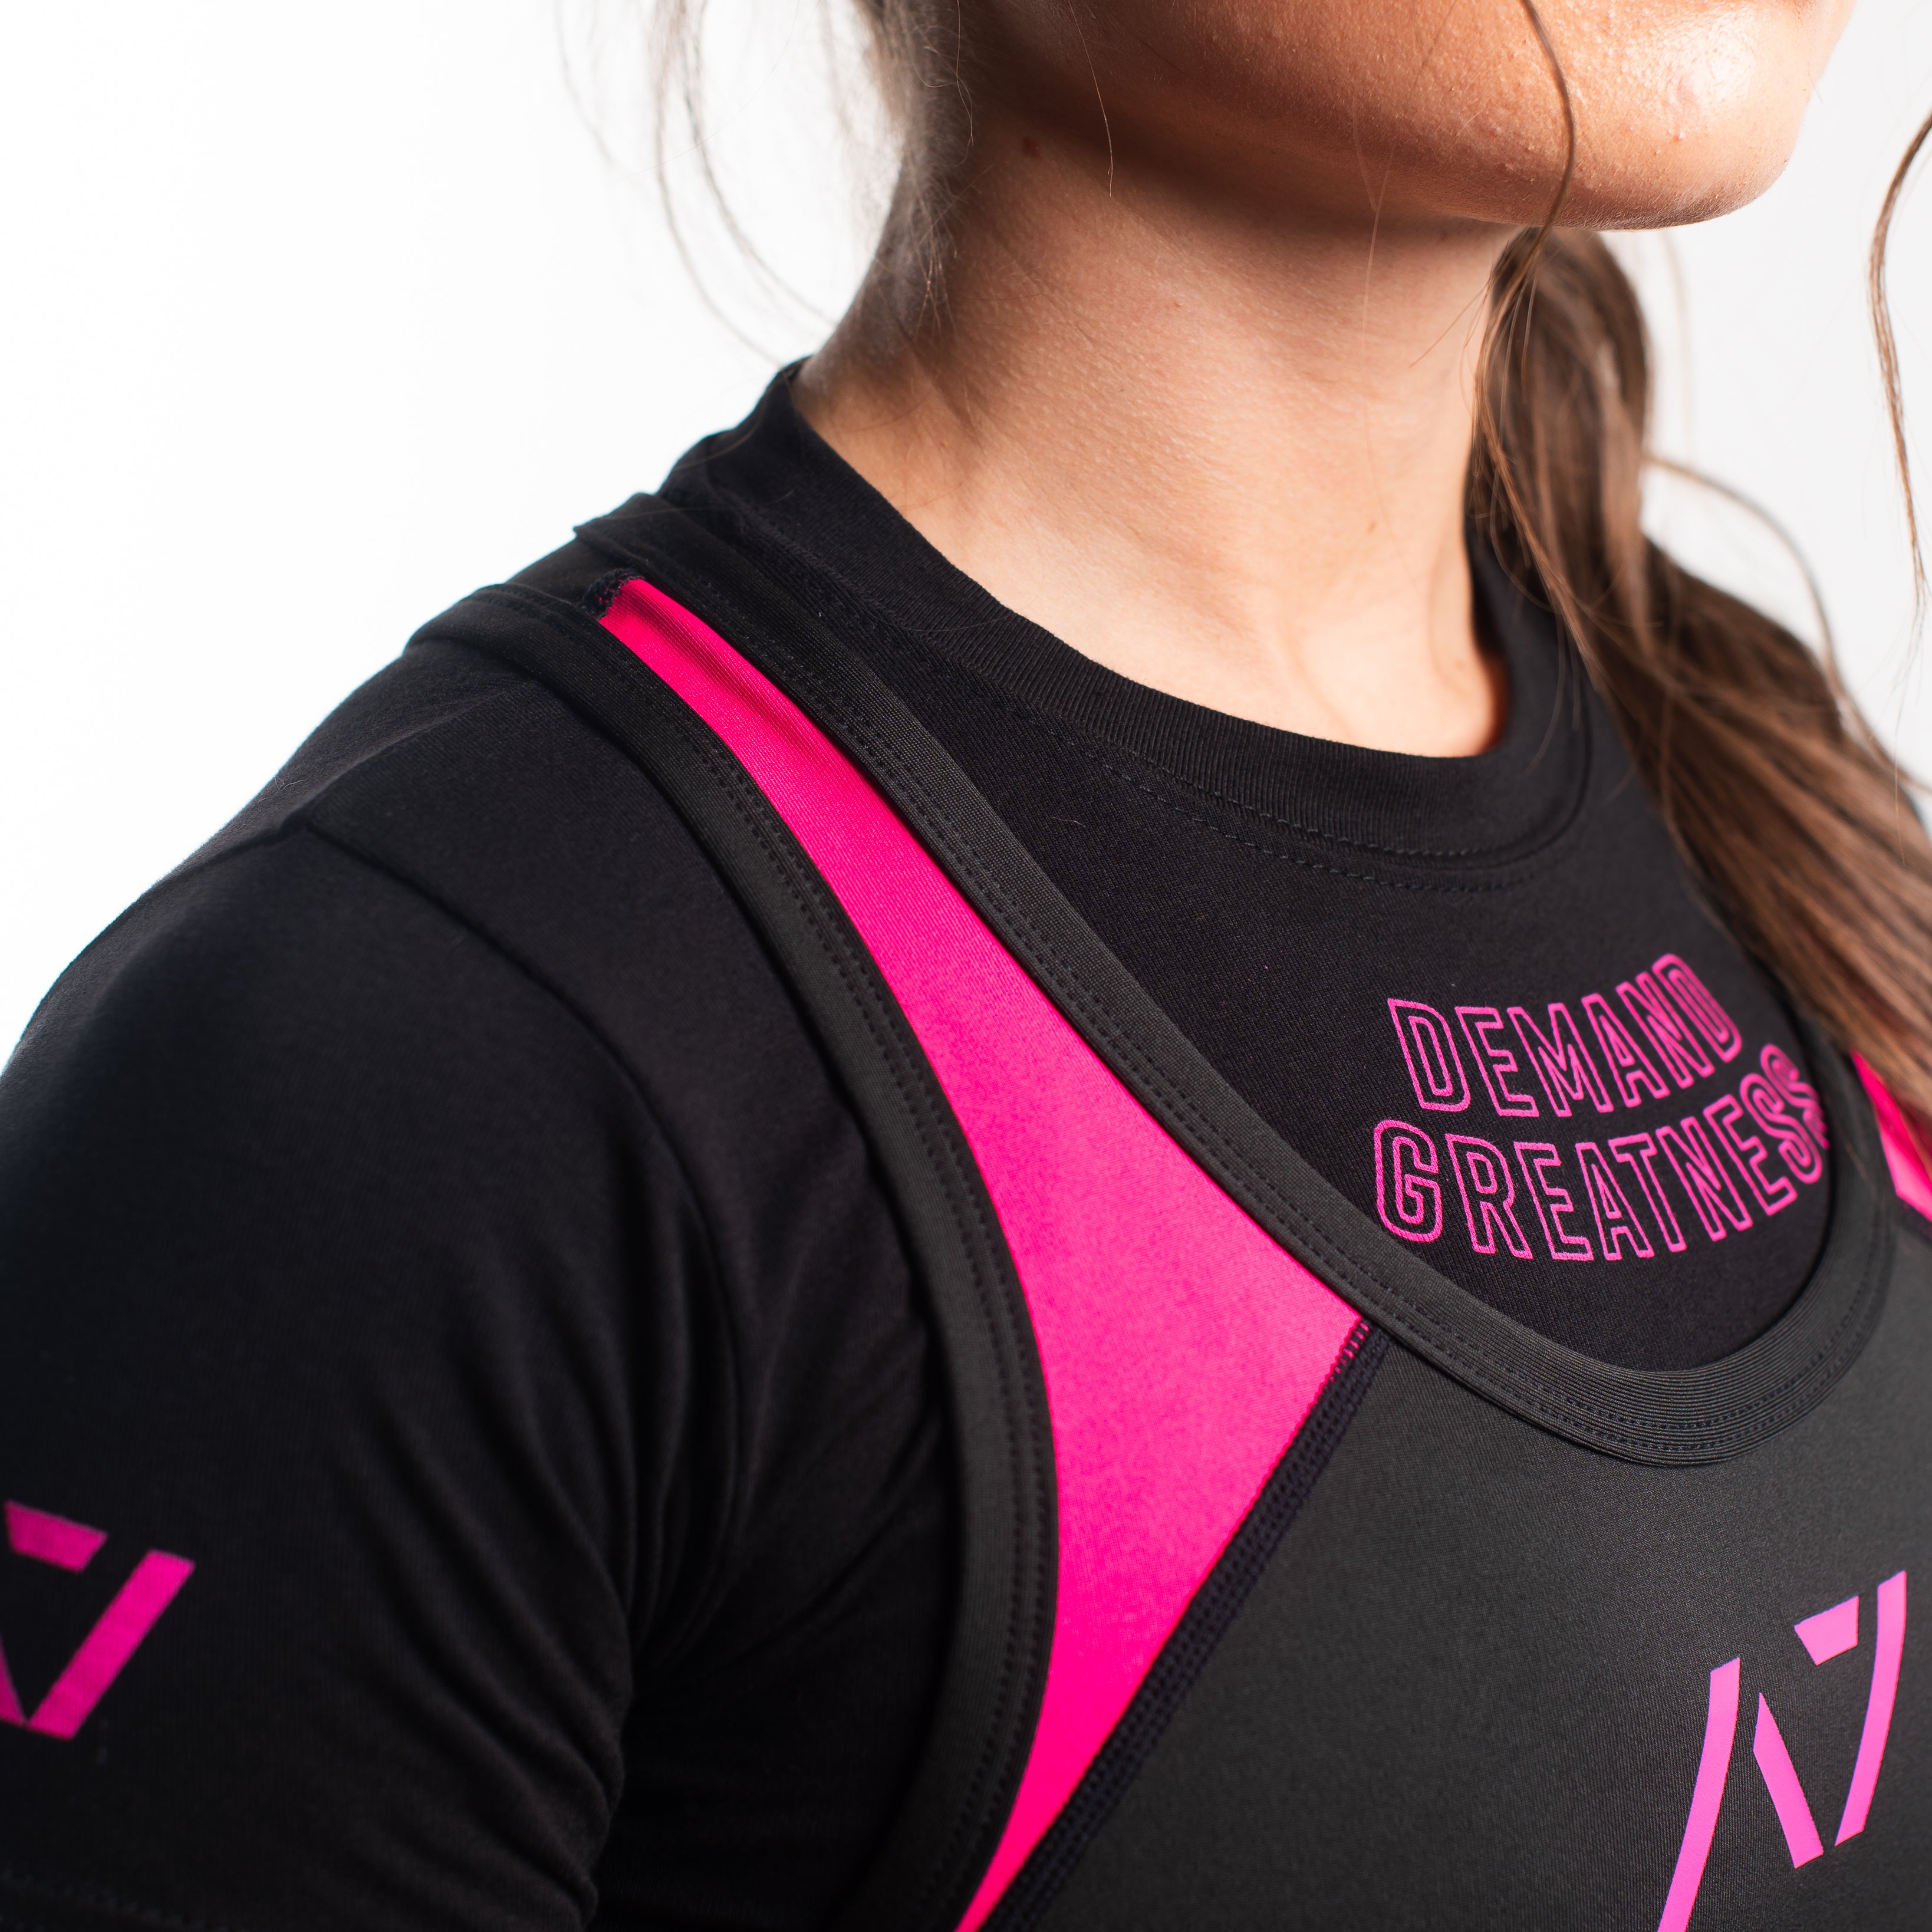 A7 IPF Approved Flamingo Luno singlet with extra lat mobility, side panel stitching to guide the squat depth level and curved panel design for a slimming look. The Women's cut singlet features a tapered waist and additional quad room. The IPF Approved Kit includes Powerlifting Singlet, A7 Meet Shirt, A7 Zebra Wrist Wraps, A7 Deadlift Socks, Hourglass Knee Sleeves (Stiff Knee Sleeves and Rigor Mortis Knee Sleeves). Genouillères powerlifting shipping to France, Spain, Ireland, Germany, Italy, Sweden and EU.